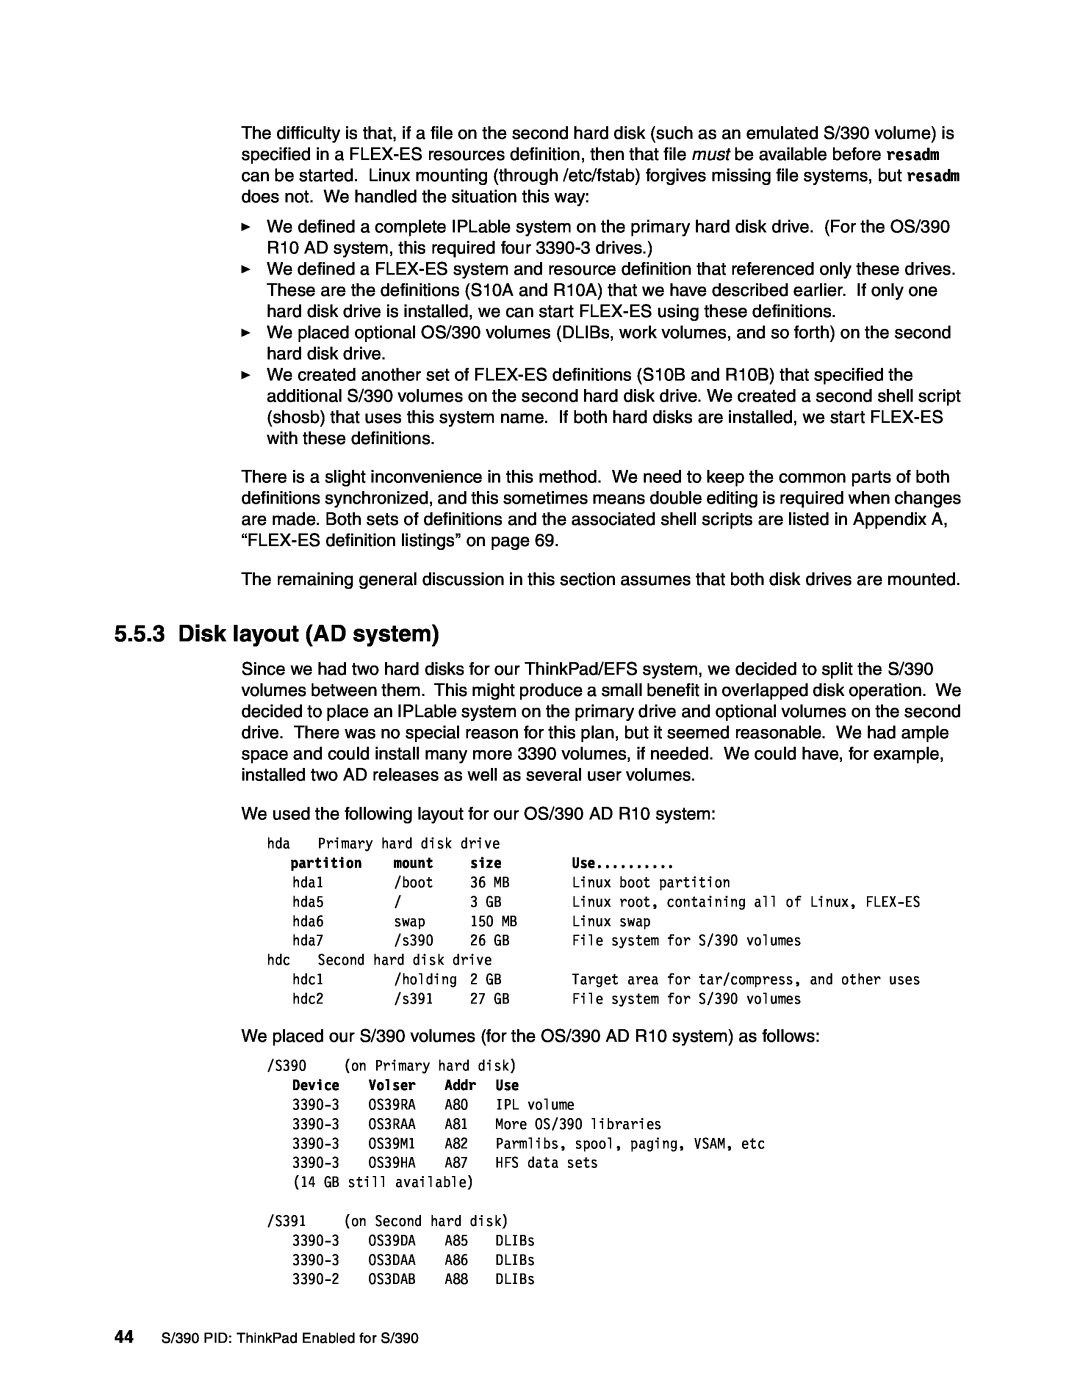 IBM s/390 manual Disk layout AD system 